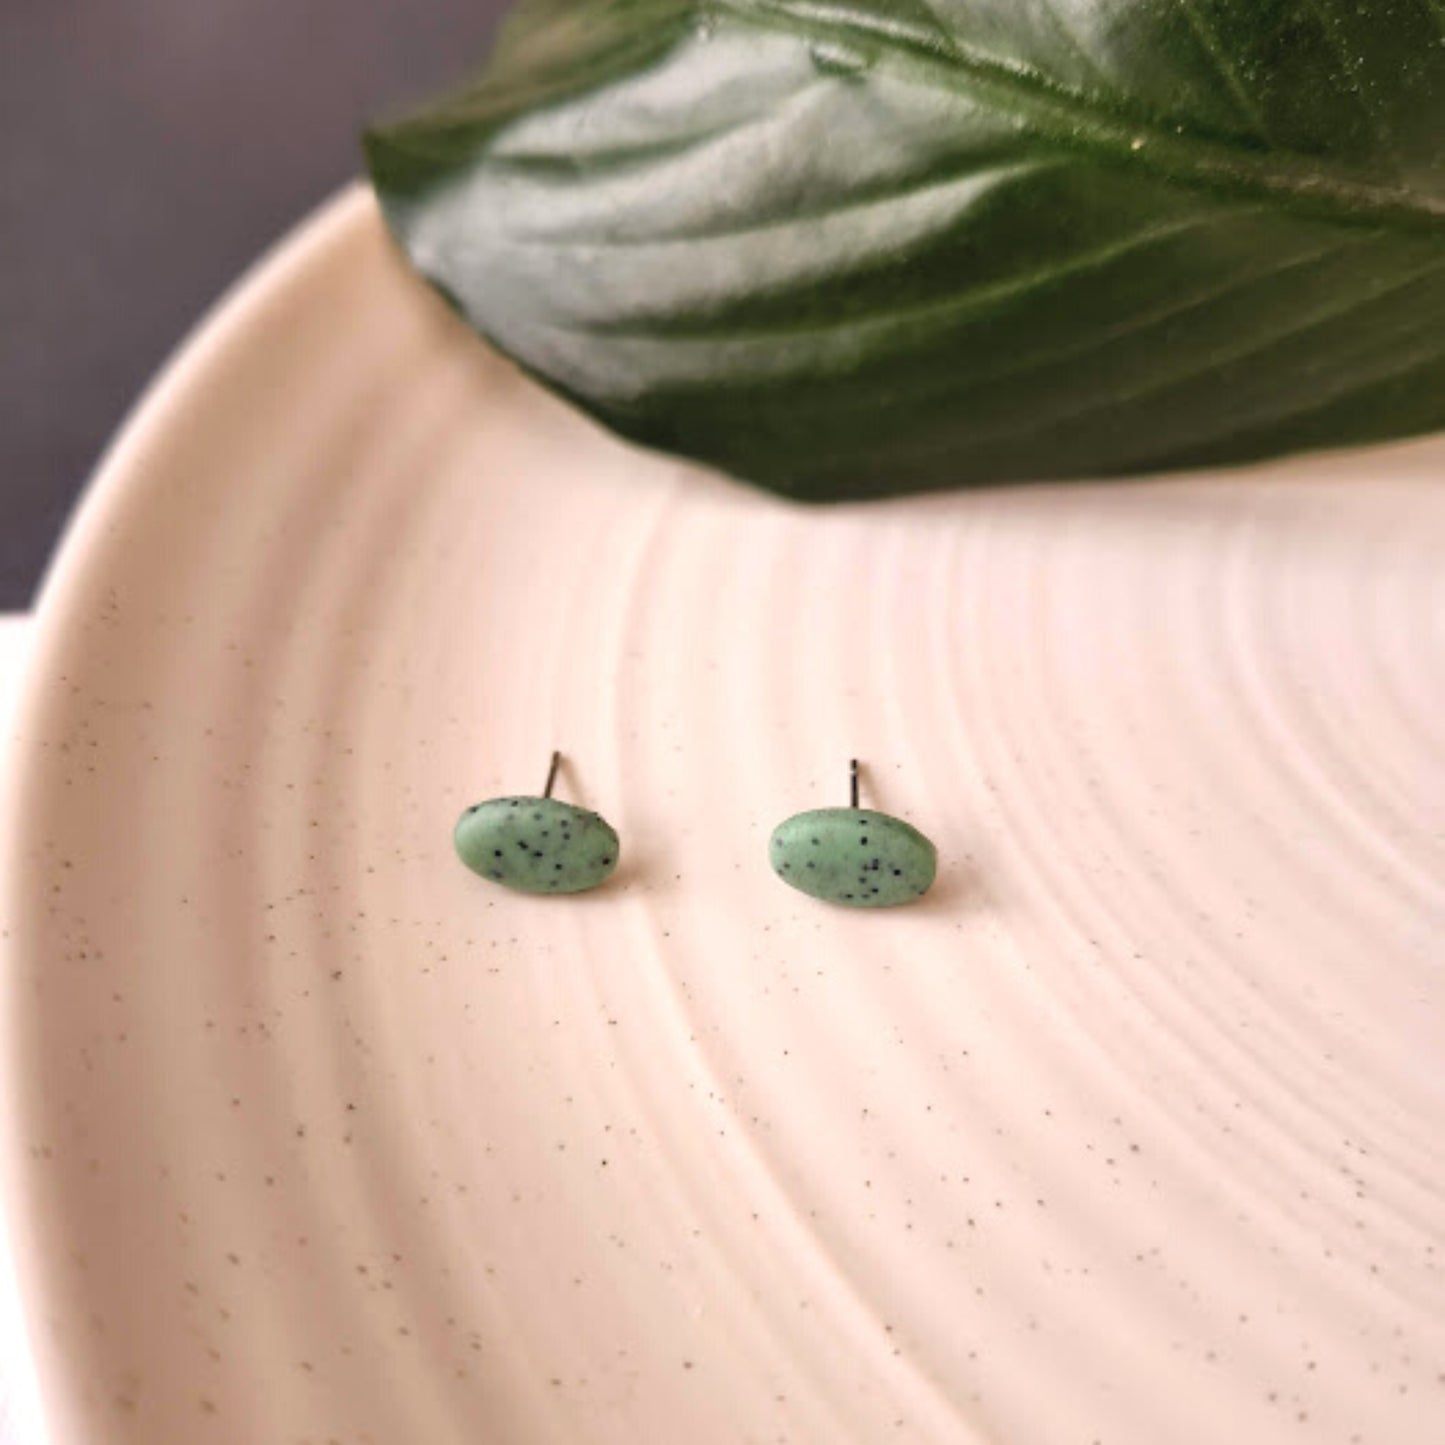 The Enza Mint Colored Oval Polymer Clay Stud Earrings